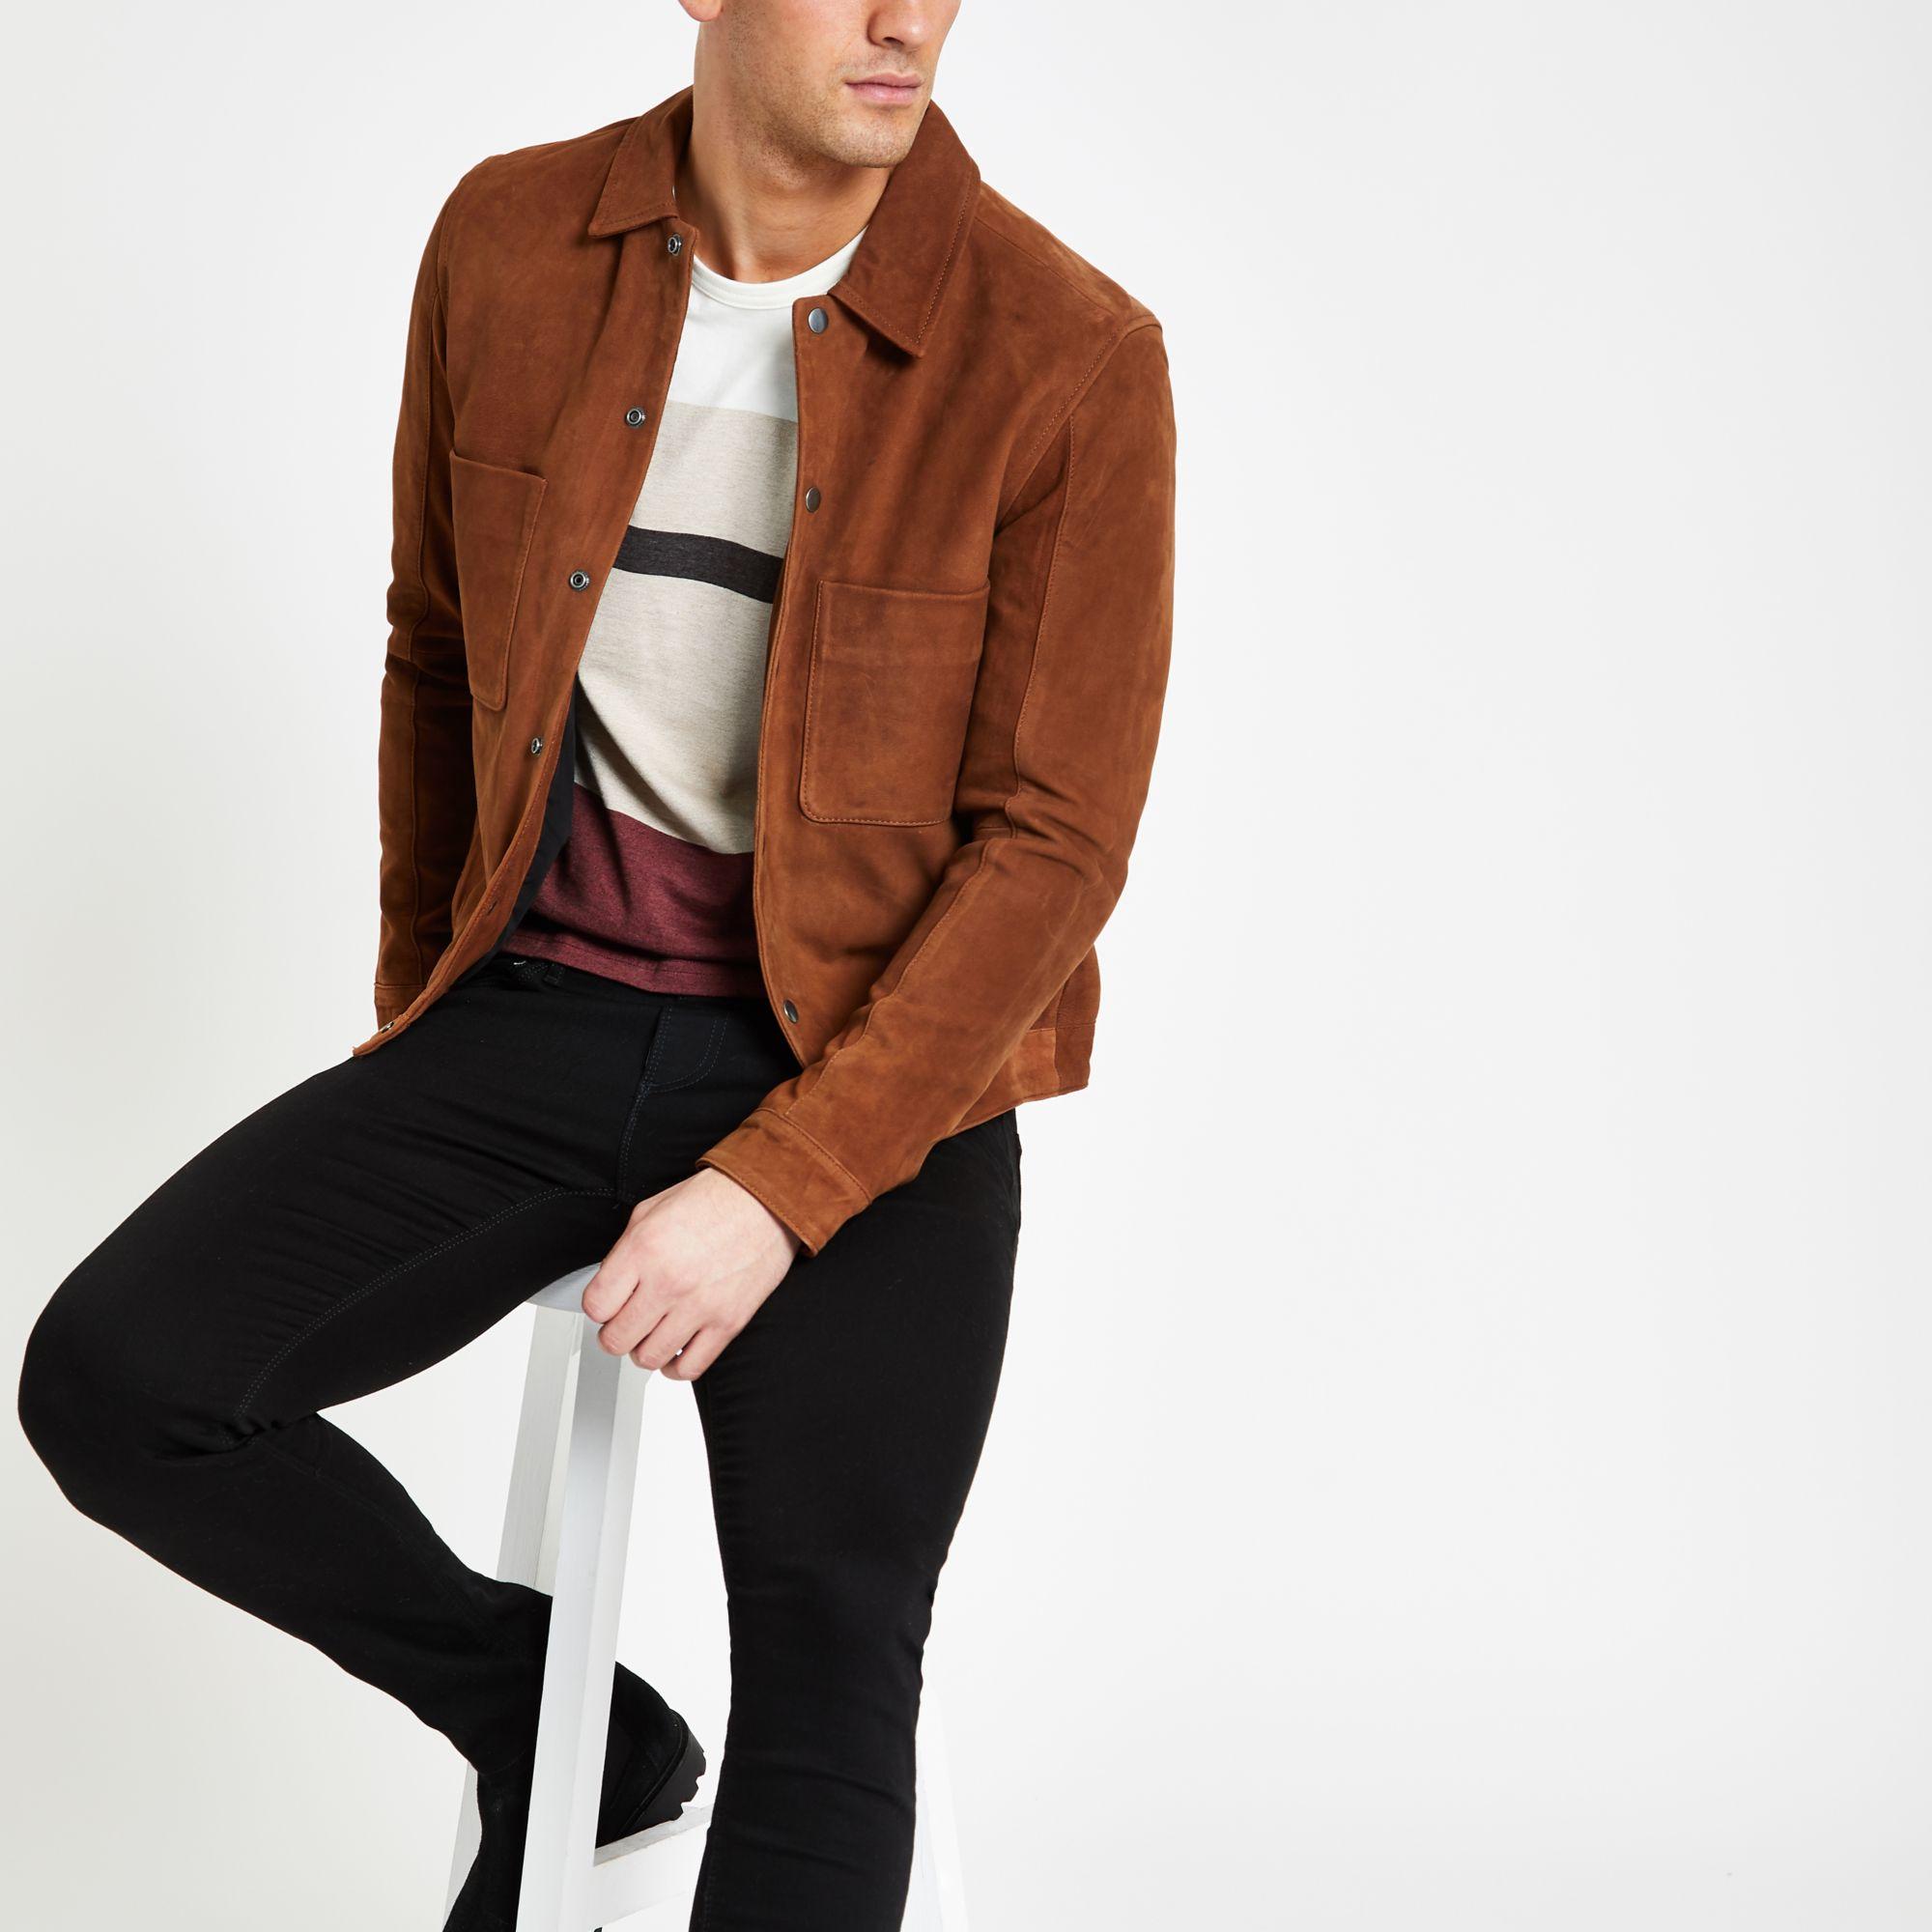 River Island Selected Homme Leather Jacket in Brown for Men - Lyst